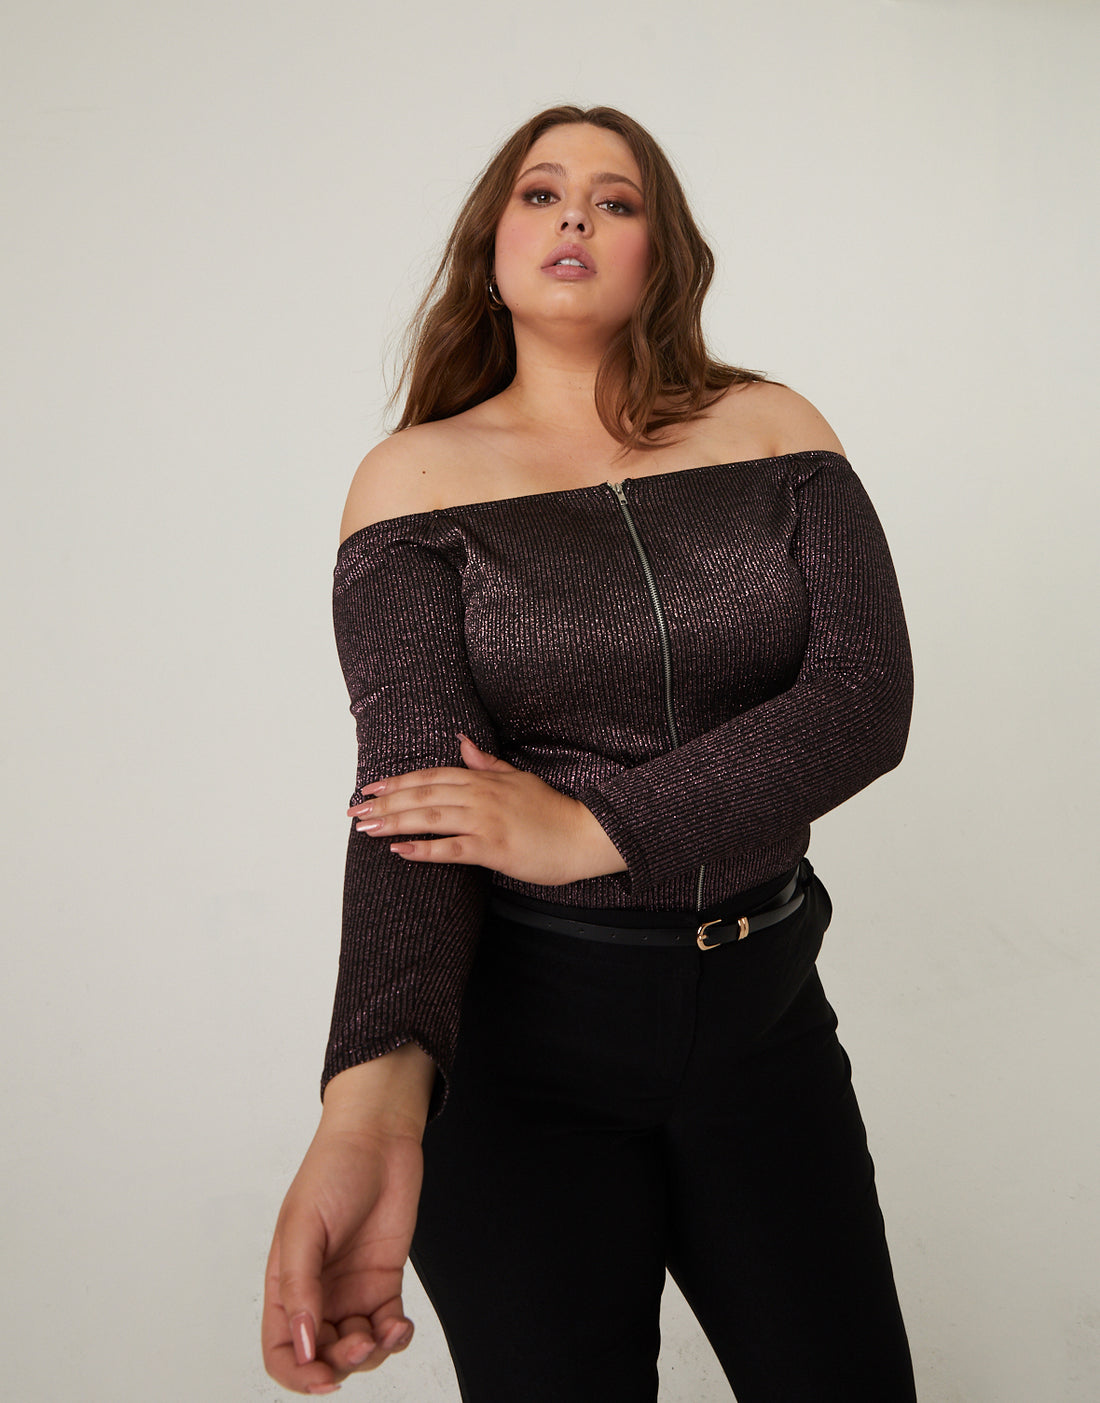 Curve Glittery Zip Up Top Plus Size Tops -2020AVE